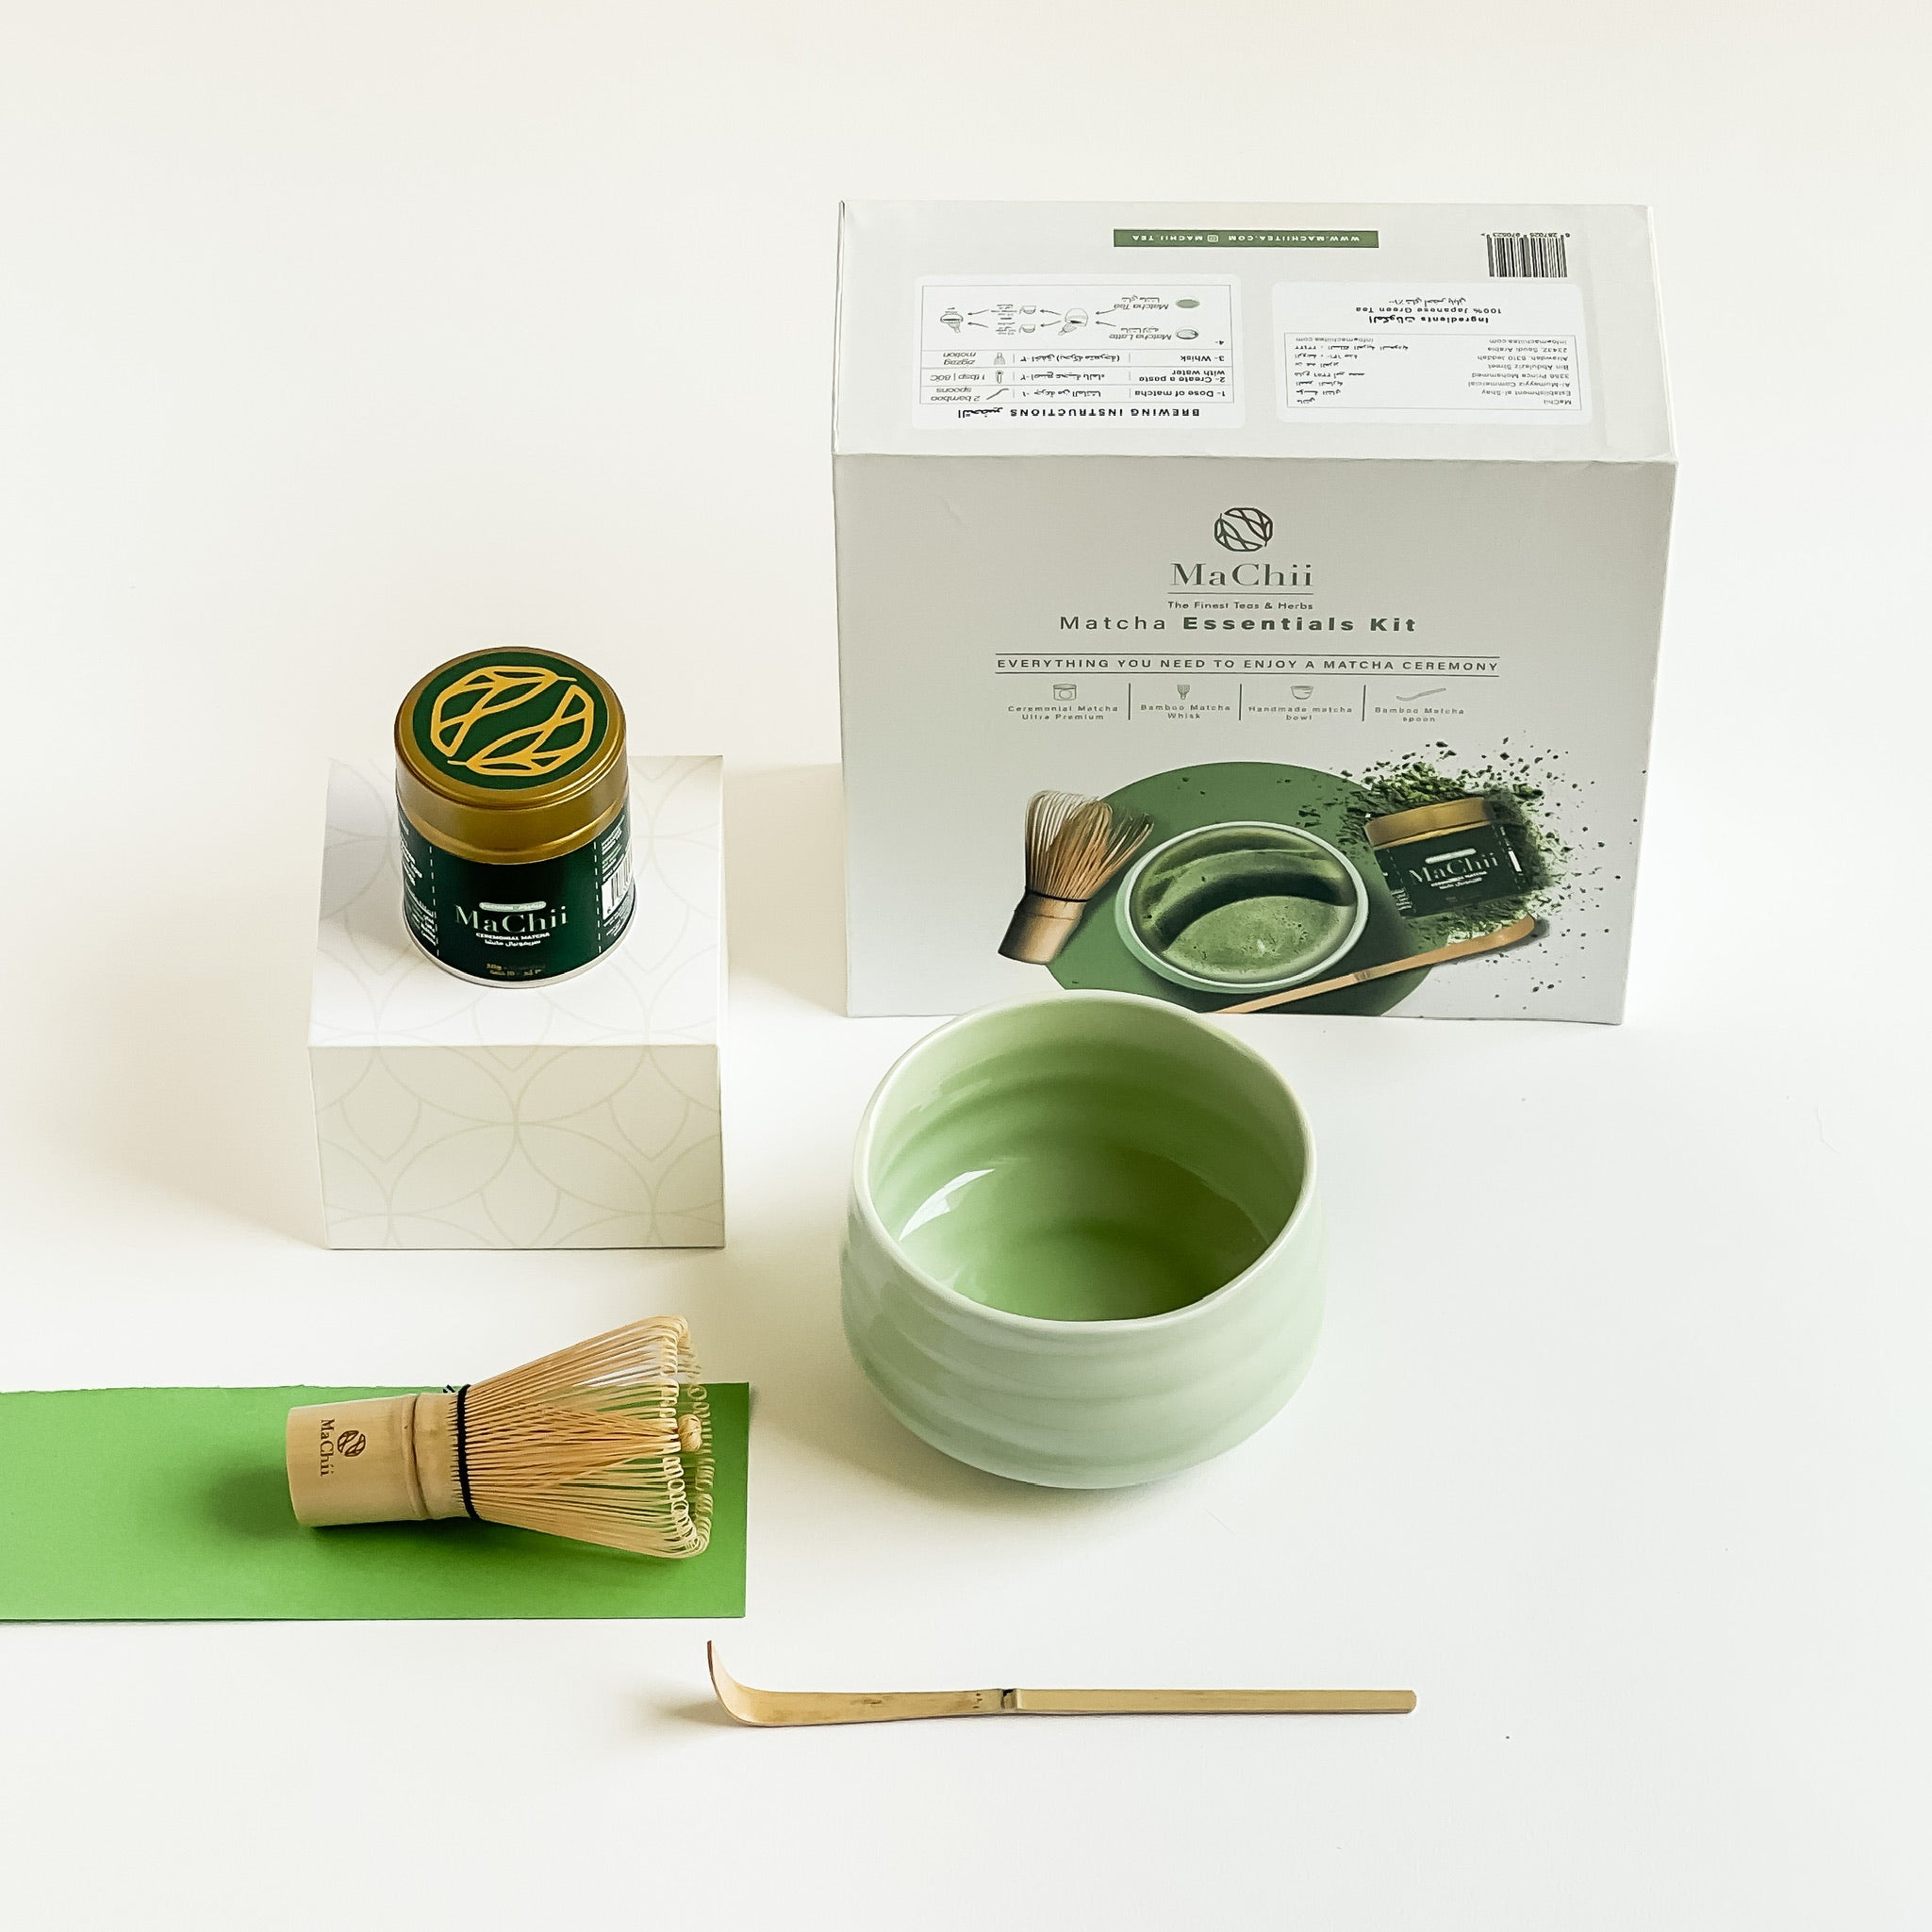 a matcha gift box with a gold 30g luxury organic matcha first harvest tin, a 120 pondat matcha whisk, a green matcha bowl and a bamboo scoop. the machii tea logo is engraved on every product,